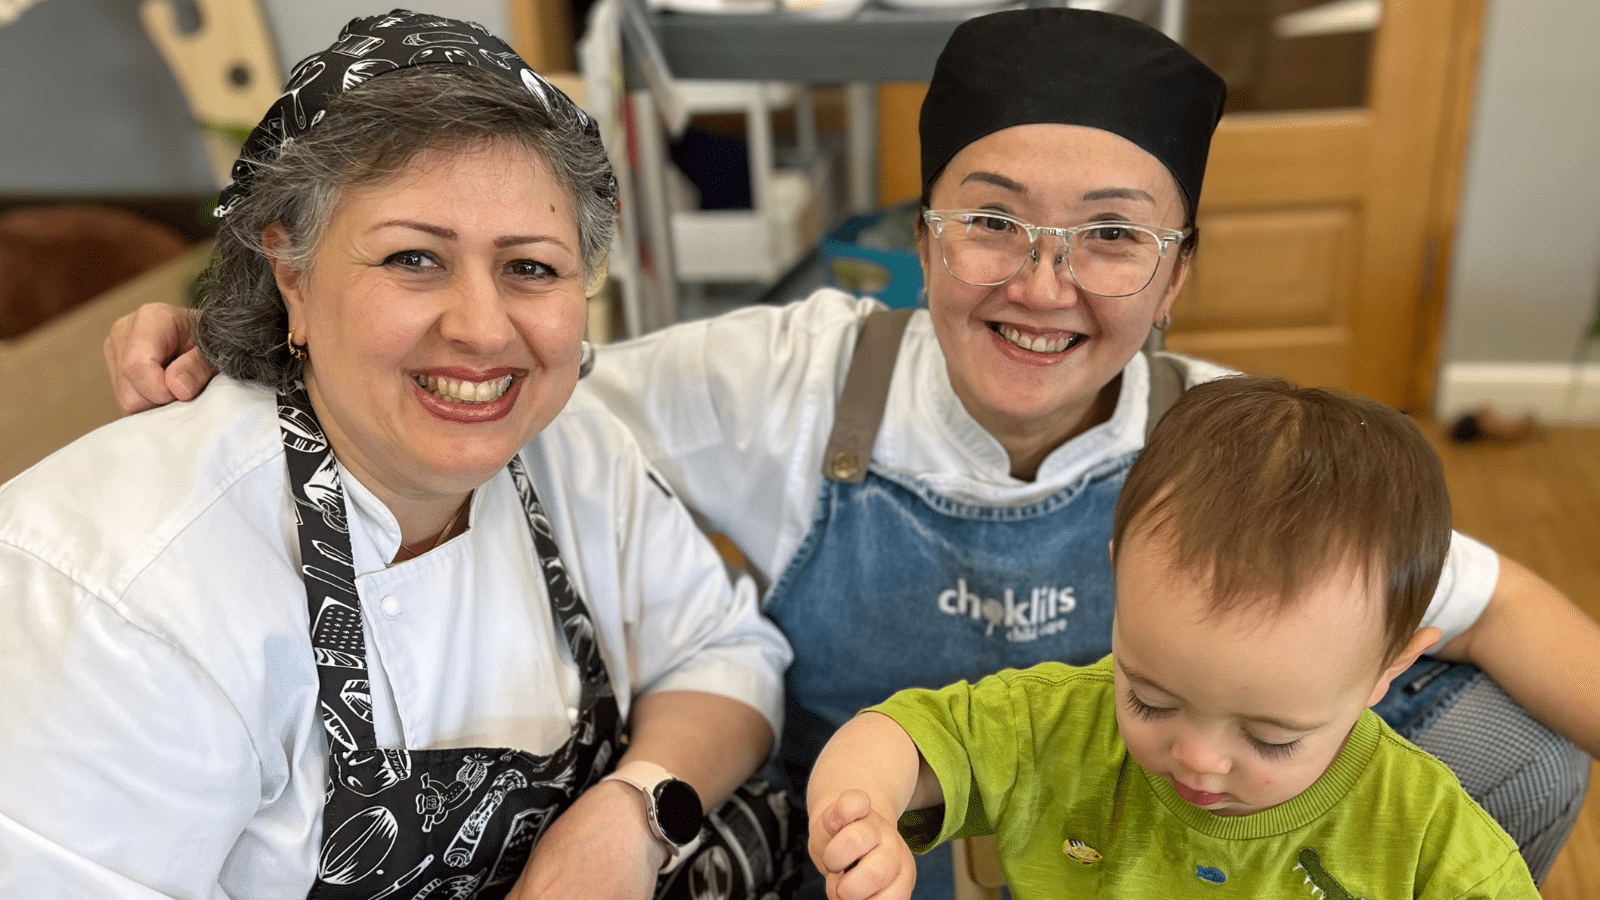 Chef Lai and Chef Leila at Choklits Child Care